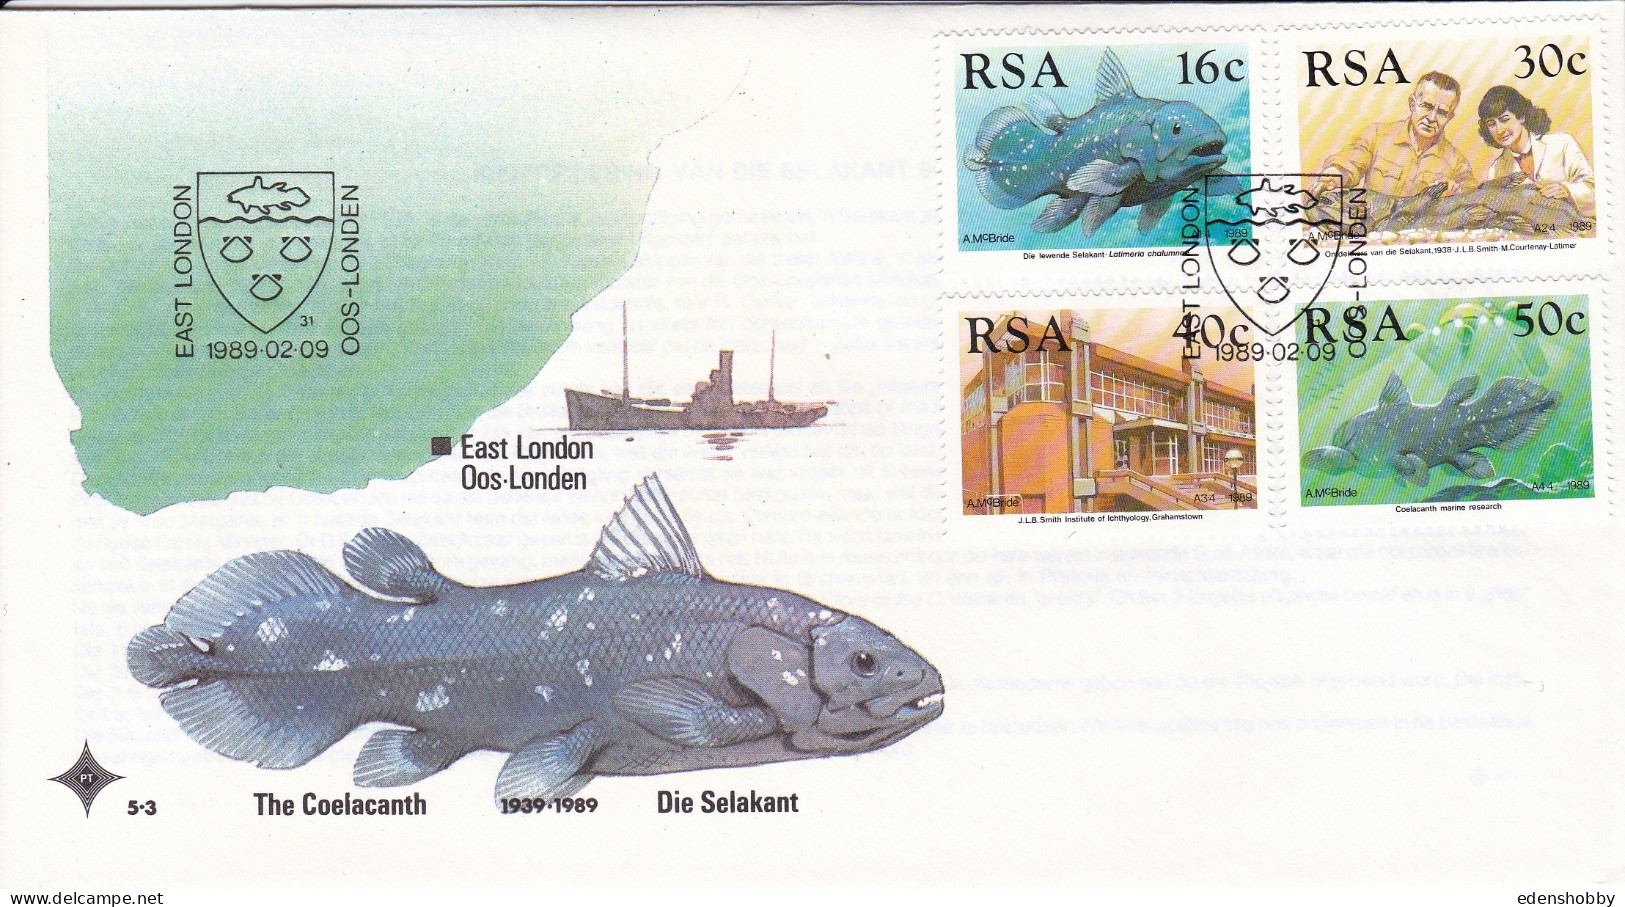 SOUTH AFRICA RSA 1988-89 10 Official First day Covers FDC 4.24 4.25 4.25.1 4.26  S14 5.2 5.3 5.3.1 5.4 5.5